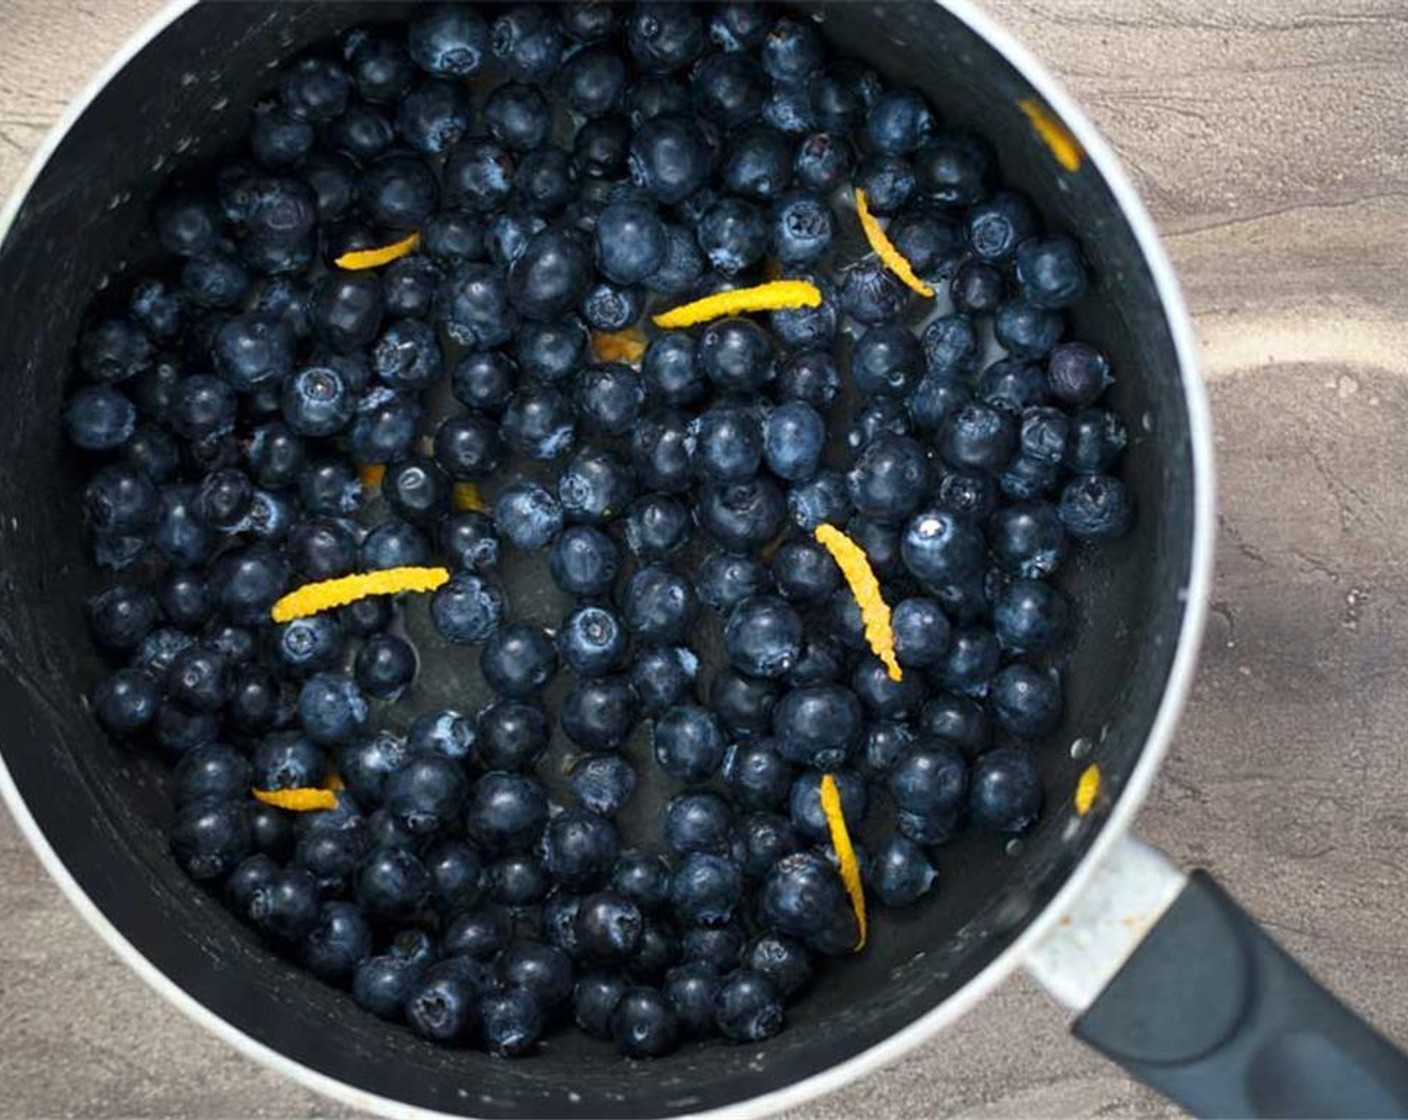 step 1 To make the blueberry pie filling start by adding Fresh Blueberries (1 1/2 cups), Granulated Sugar (1/2 Tbsp), Orange (1 tsp), Water (1 Tbsp) and Corn Starch (1 Tbsp). Cook on low heat for 15 minutes.